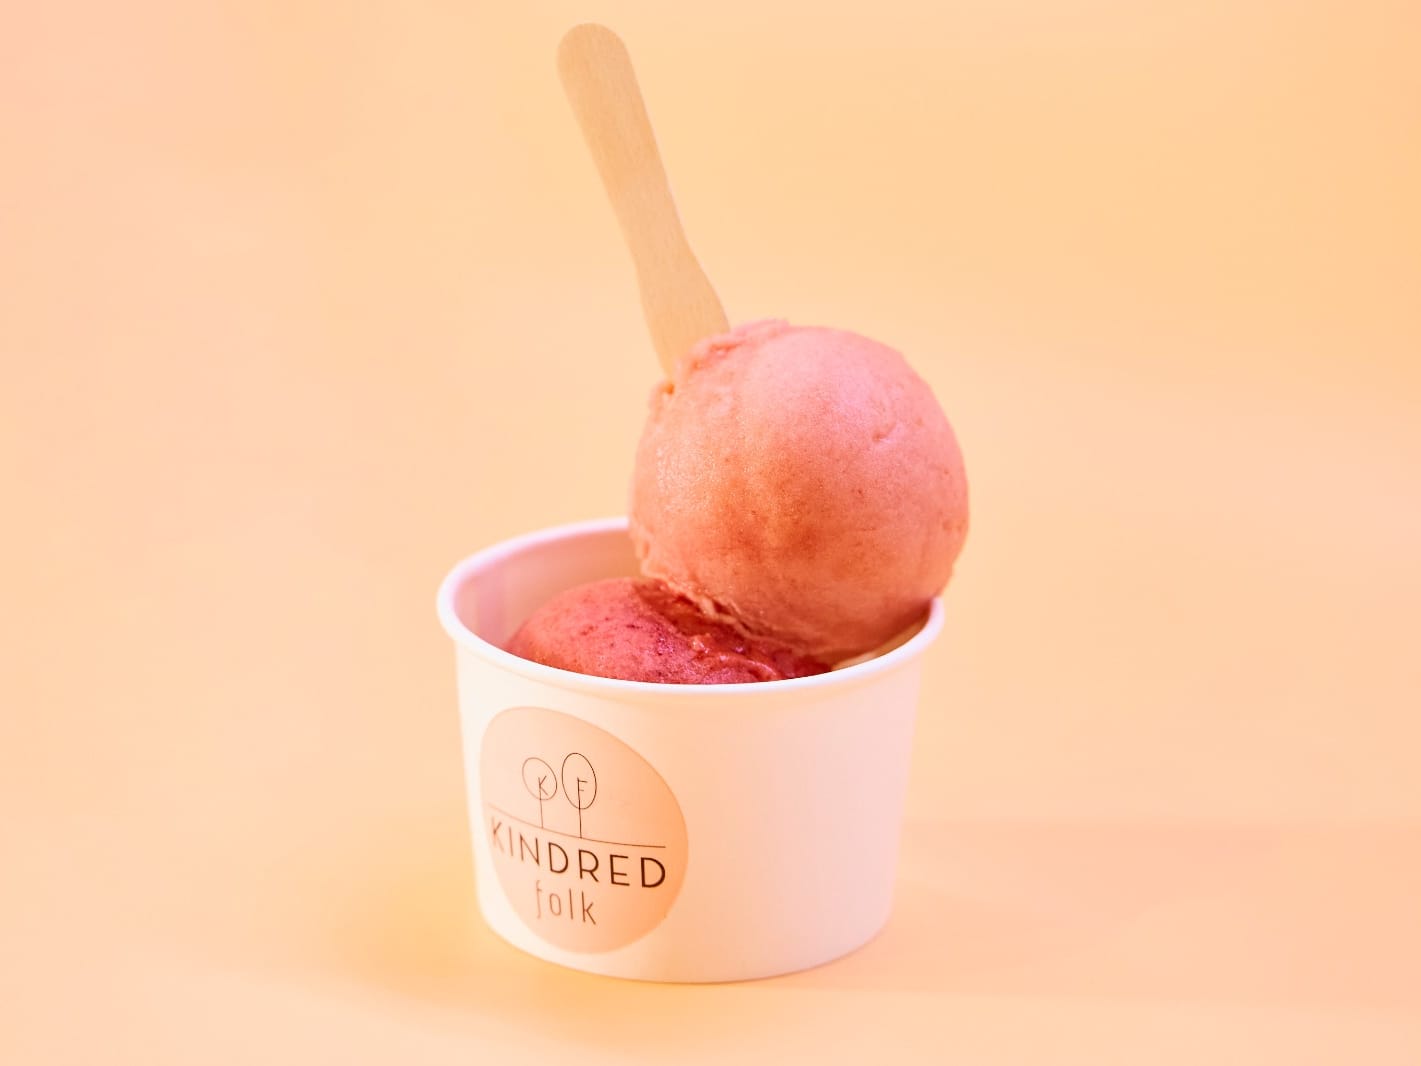 1 x Basic Flavour Single Scoop Ice Cream at Kindred Folk - Get Deals, Cashback and Rewards with ShopBack GO